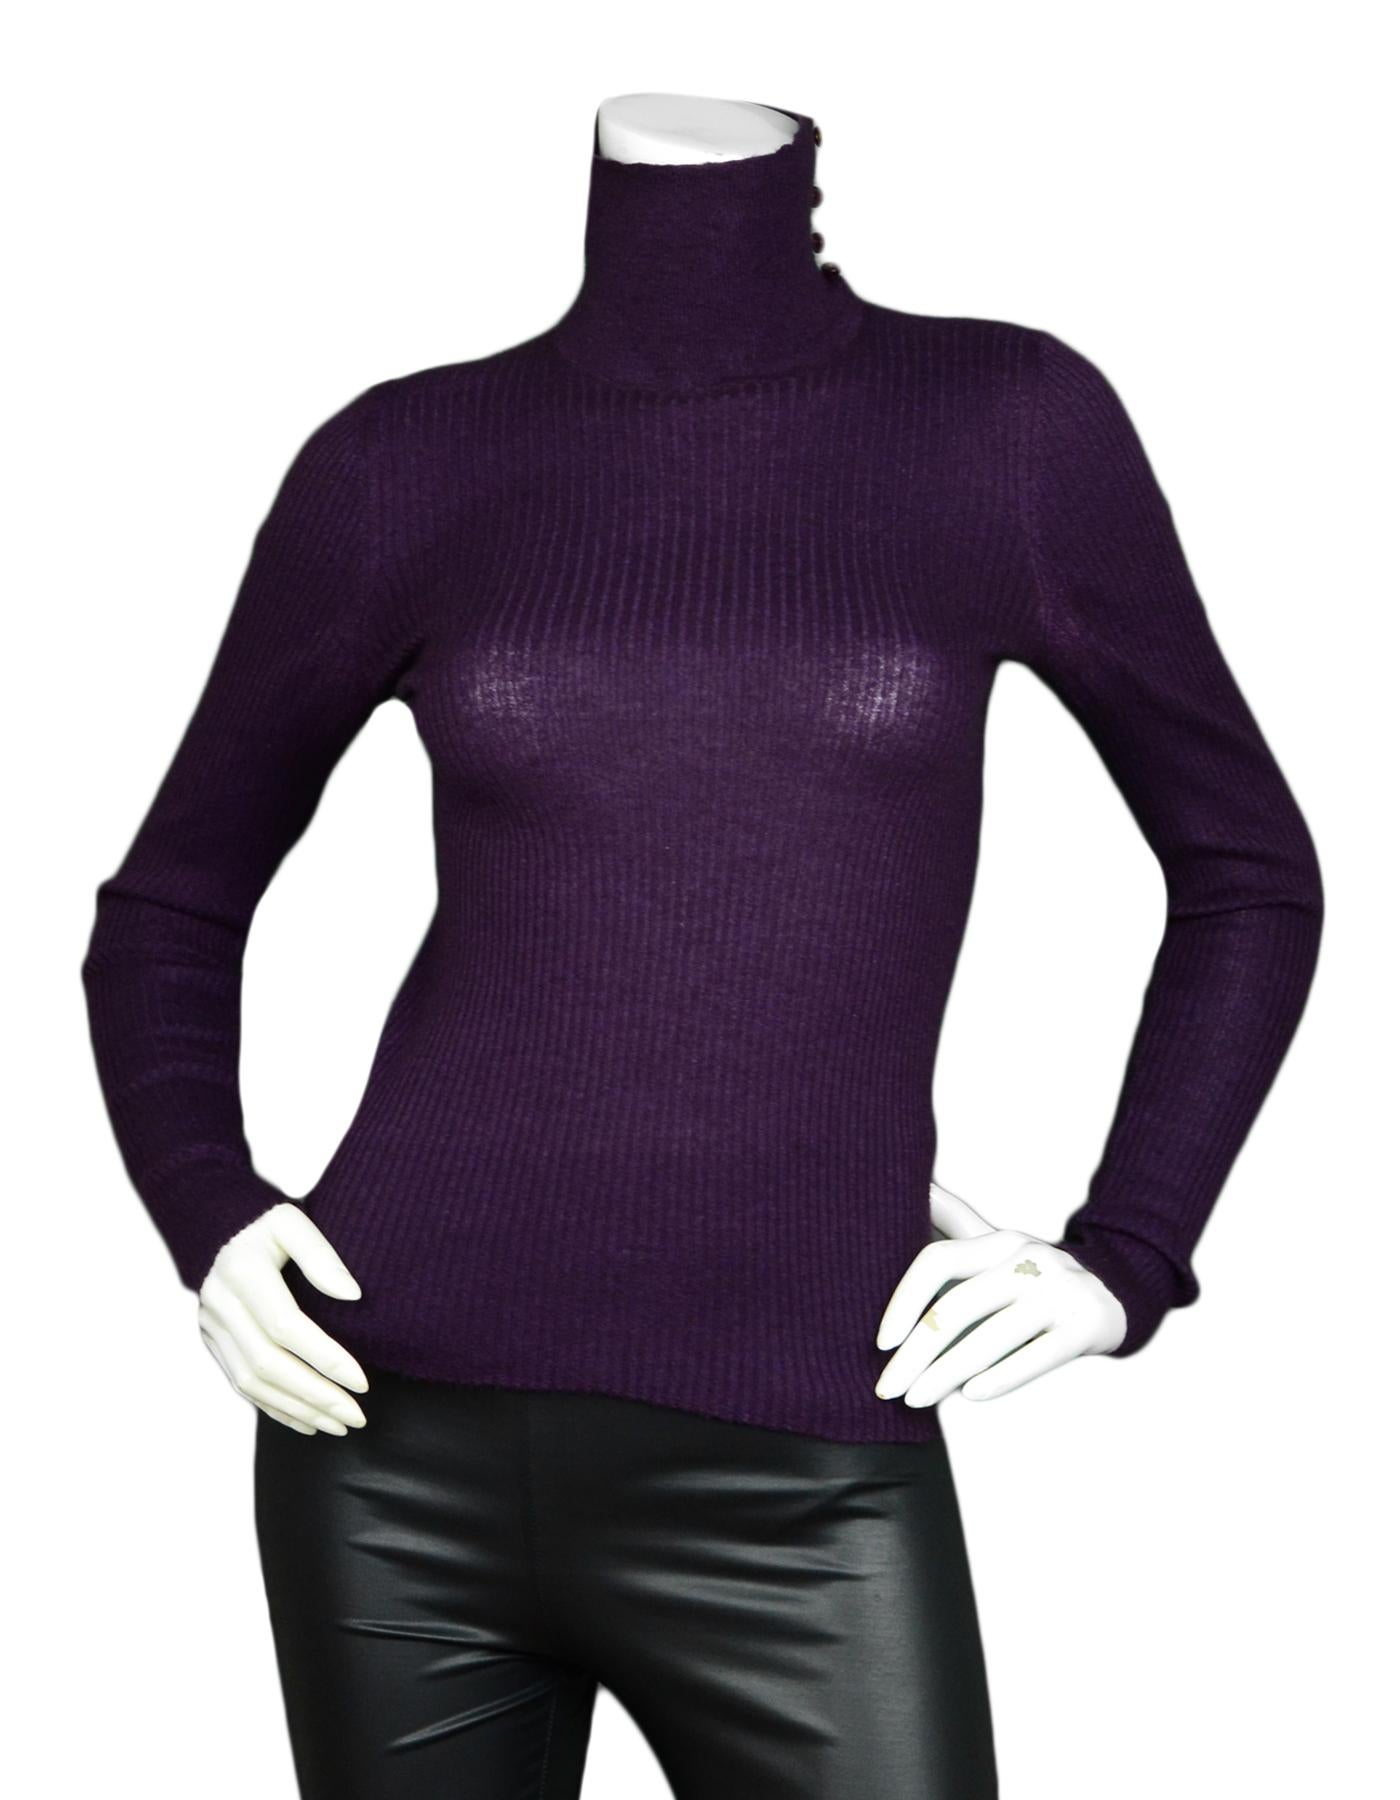 Chanel Purple Cashmere Blend Long Sleeve Turtleneck Sweater with CC Buttons sz FR38

Made In: Italy
Color: Purple
Materials: 70% Cashmere, 30% Silk
Lining: 70% Cashmere, 30% Silk 
Opening/Closure: Slip on
Overall Condition: Excellent pre-owned